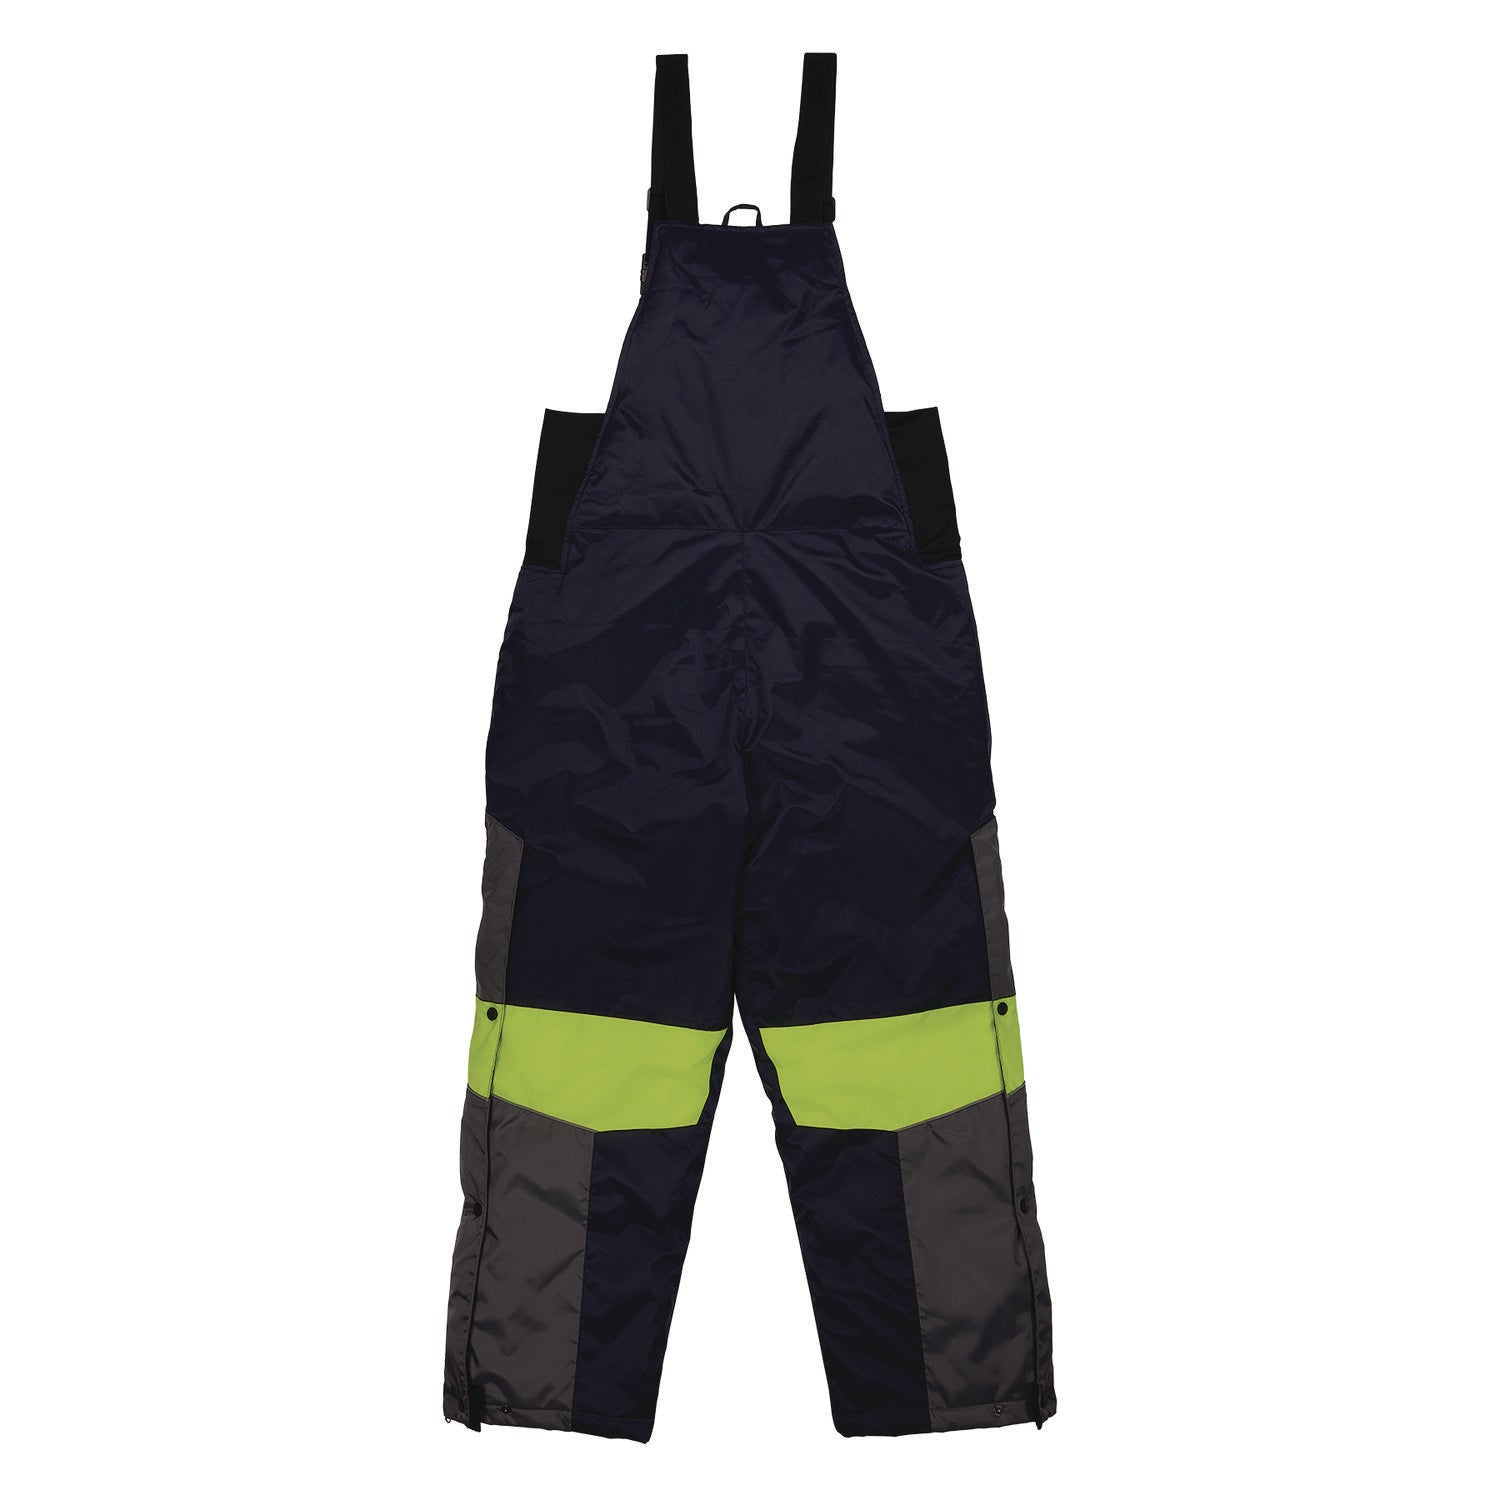 n-ferno-6477-insulated-cooler-bib-overall-x-large-navy-ships-in-1-3-business-days_ego41265 - 2